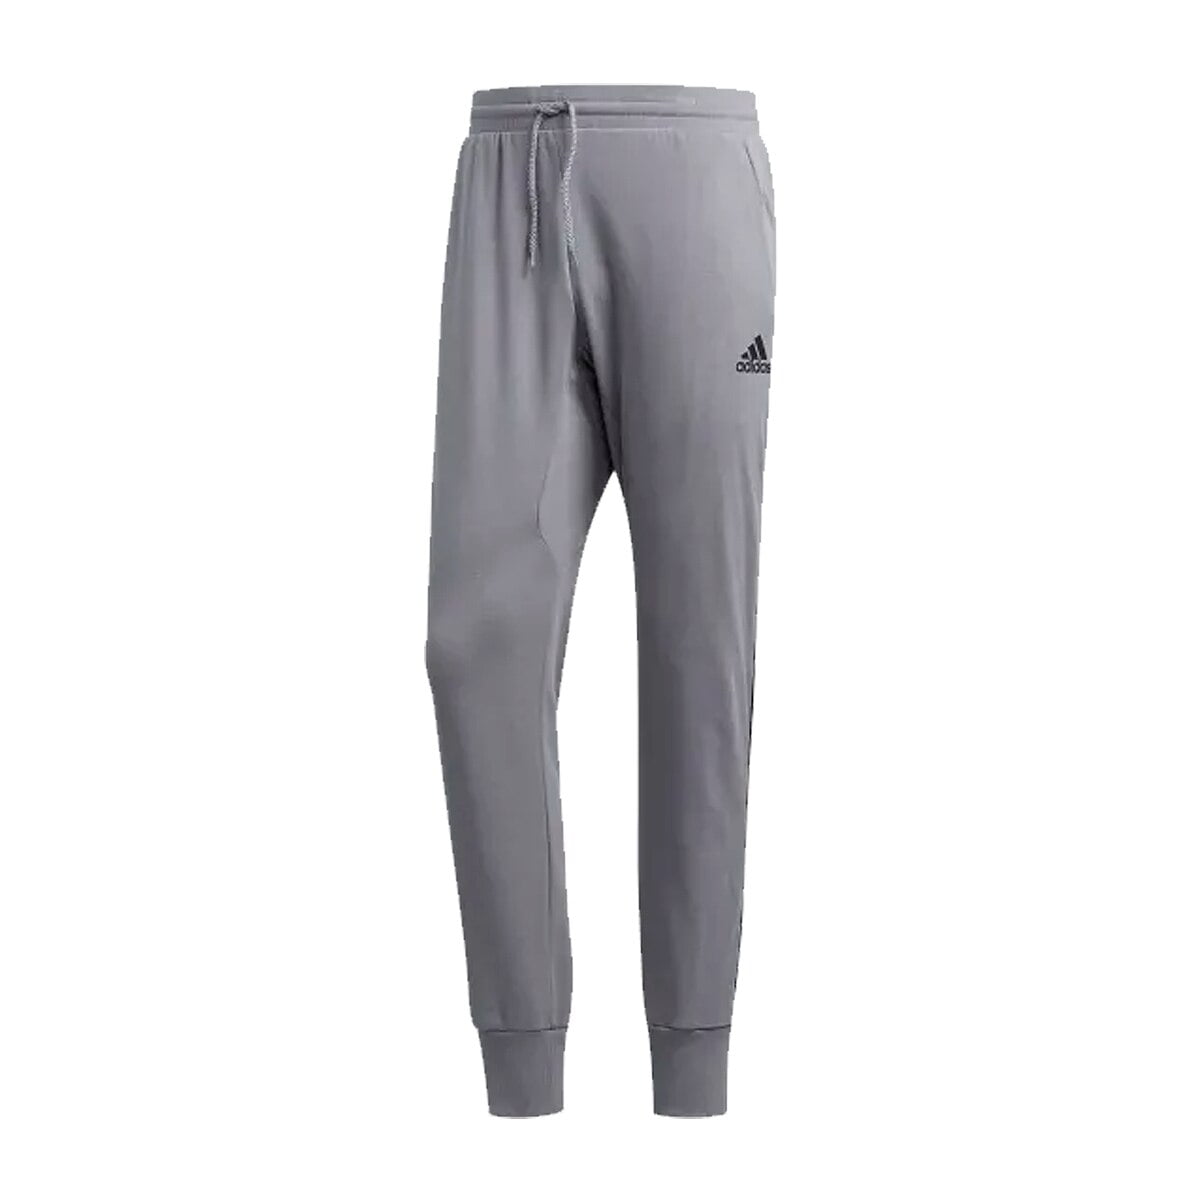 adidas sport french terry pants